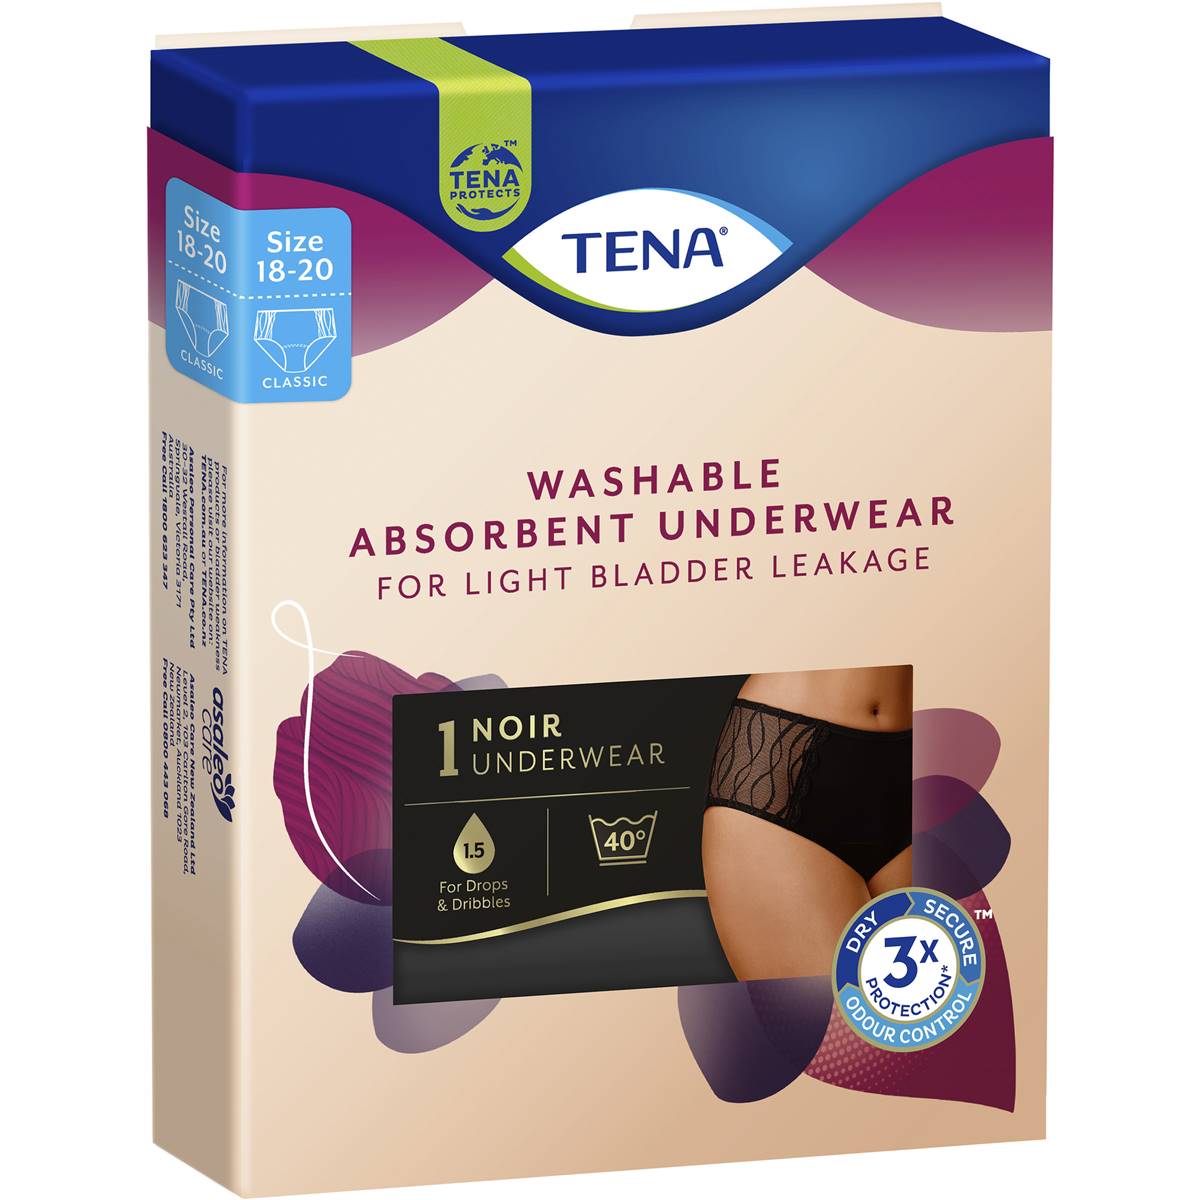 Tena Washable Absorbent Underwear Light Classic Size 18-20 1 Pack